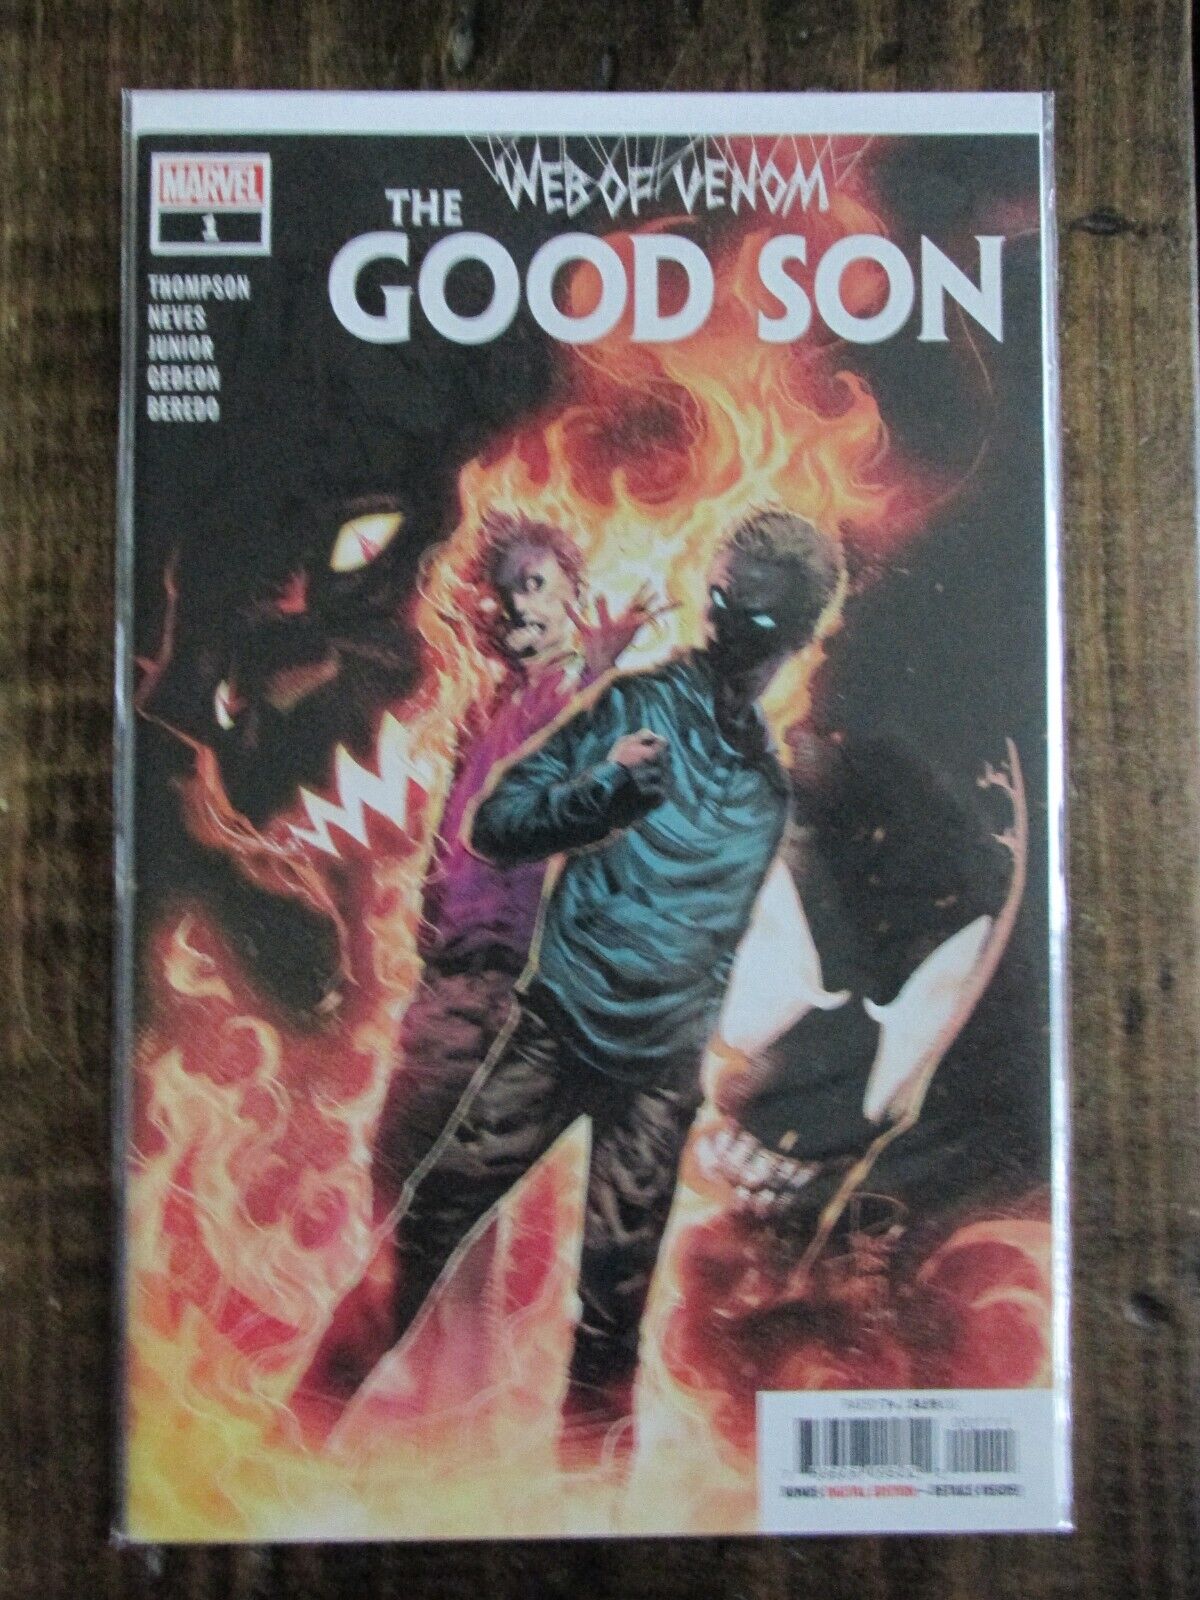 Marvel 2020 WEB OF VENOM THE GOOD SON Comic Book Issue # 1 One Shot Cover 1A